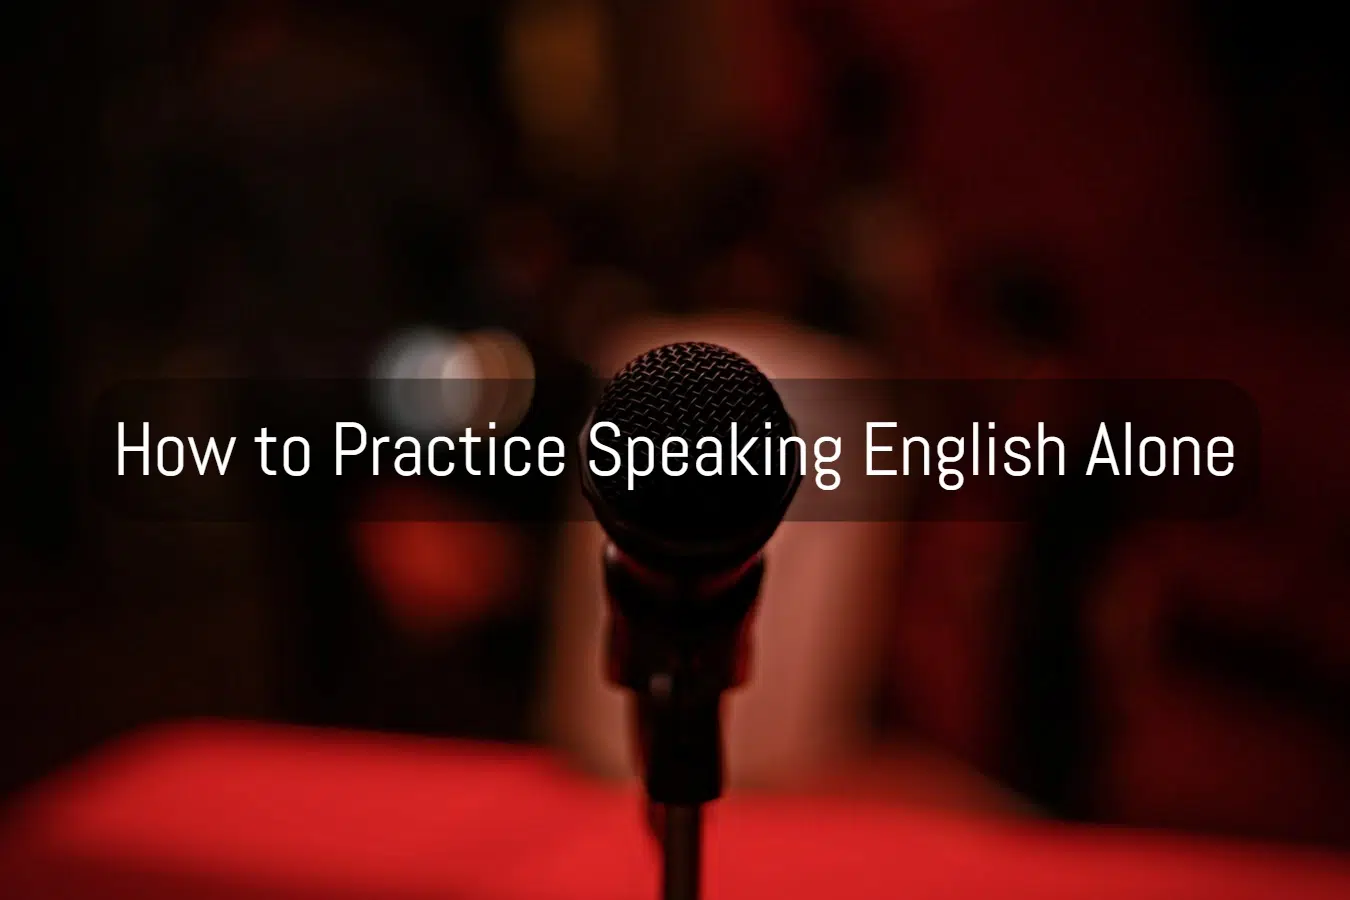 How to Practice Speaking English Alone